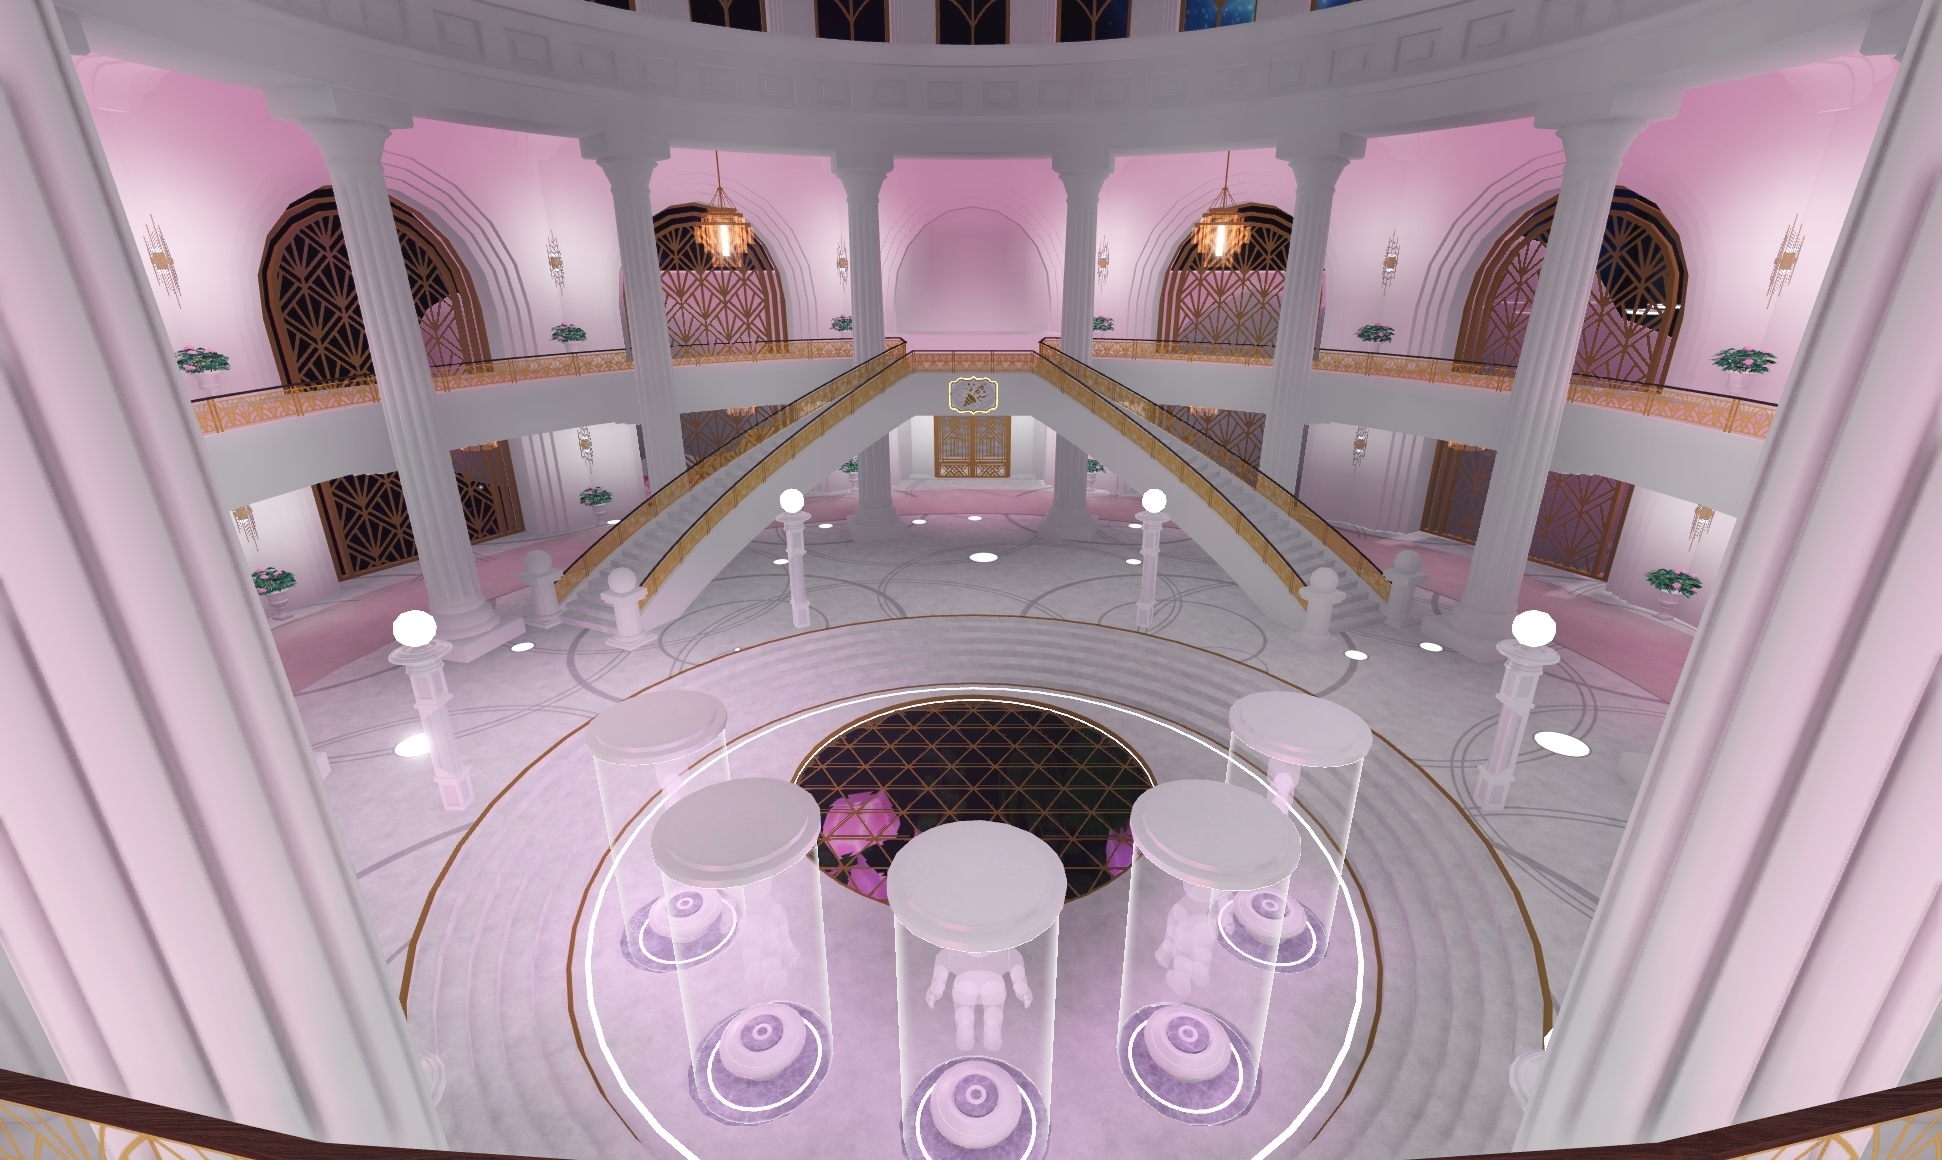 BLACKPINK's immersive palace on Roblox